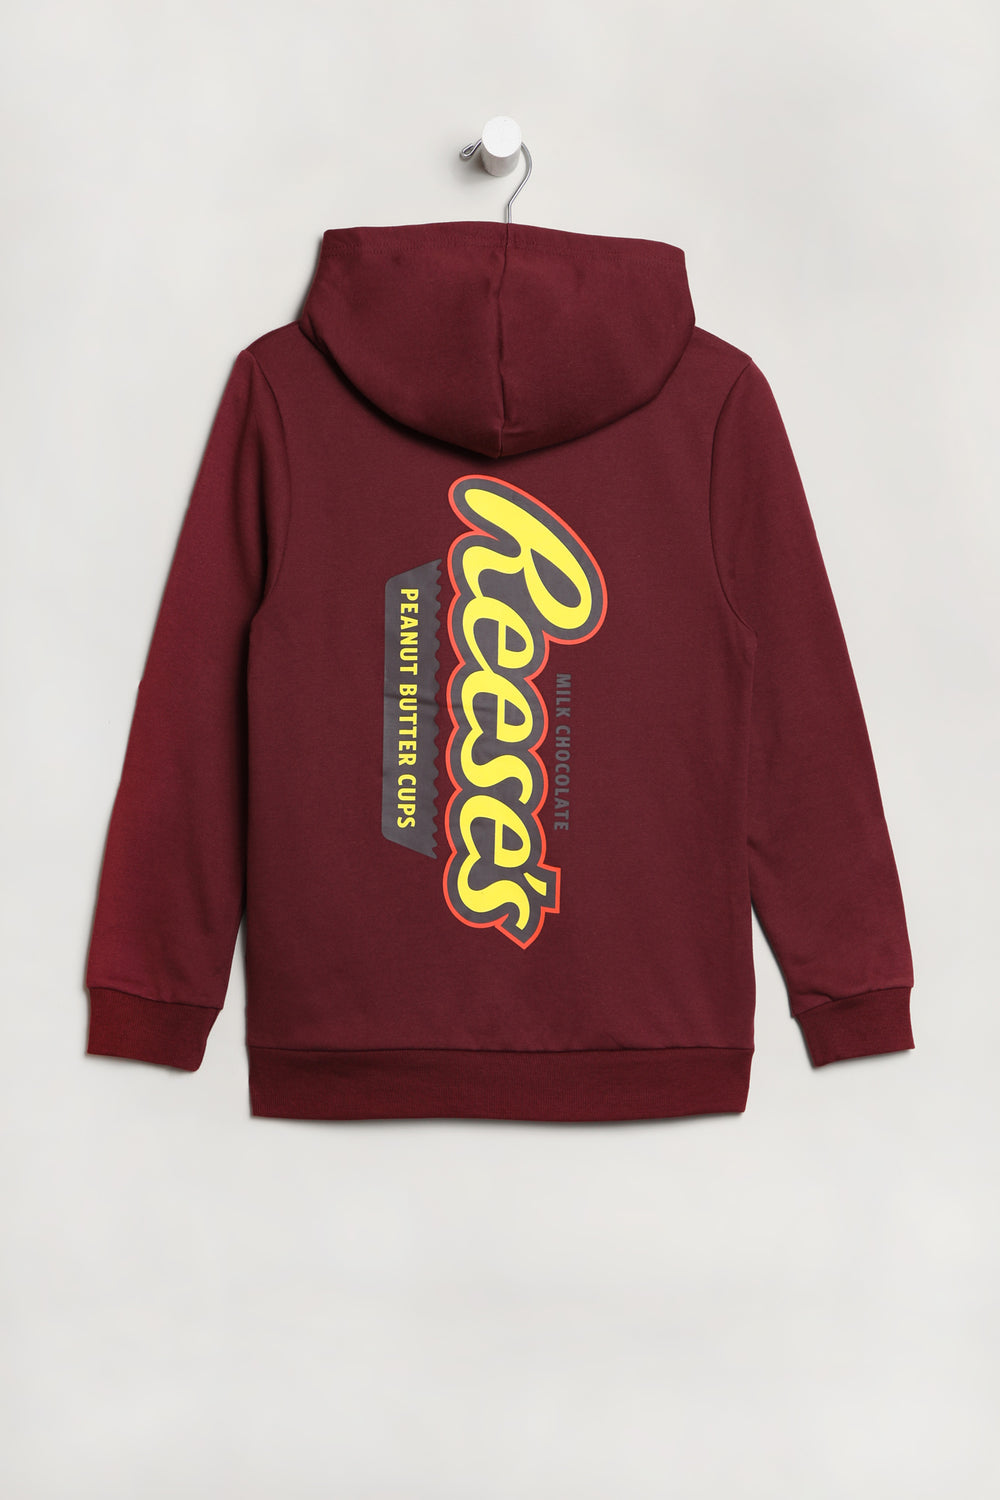 Youth Reese's Peanut Butter Cups Hoodie Wine